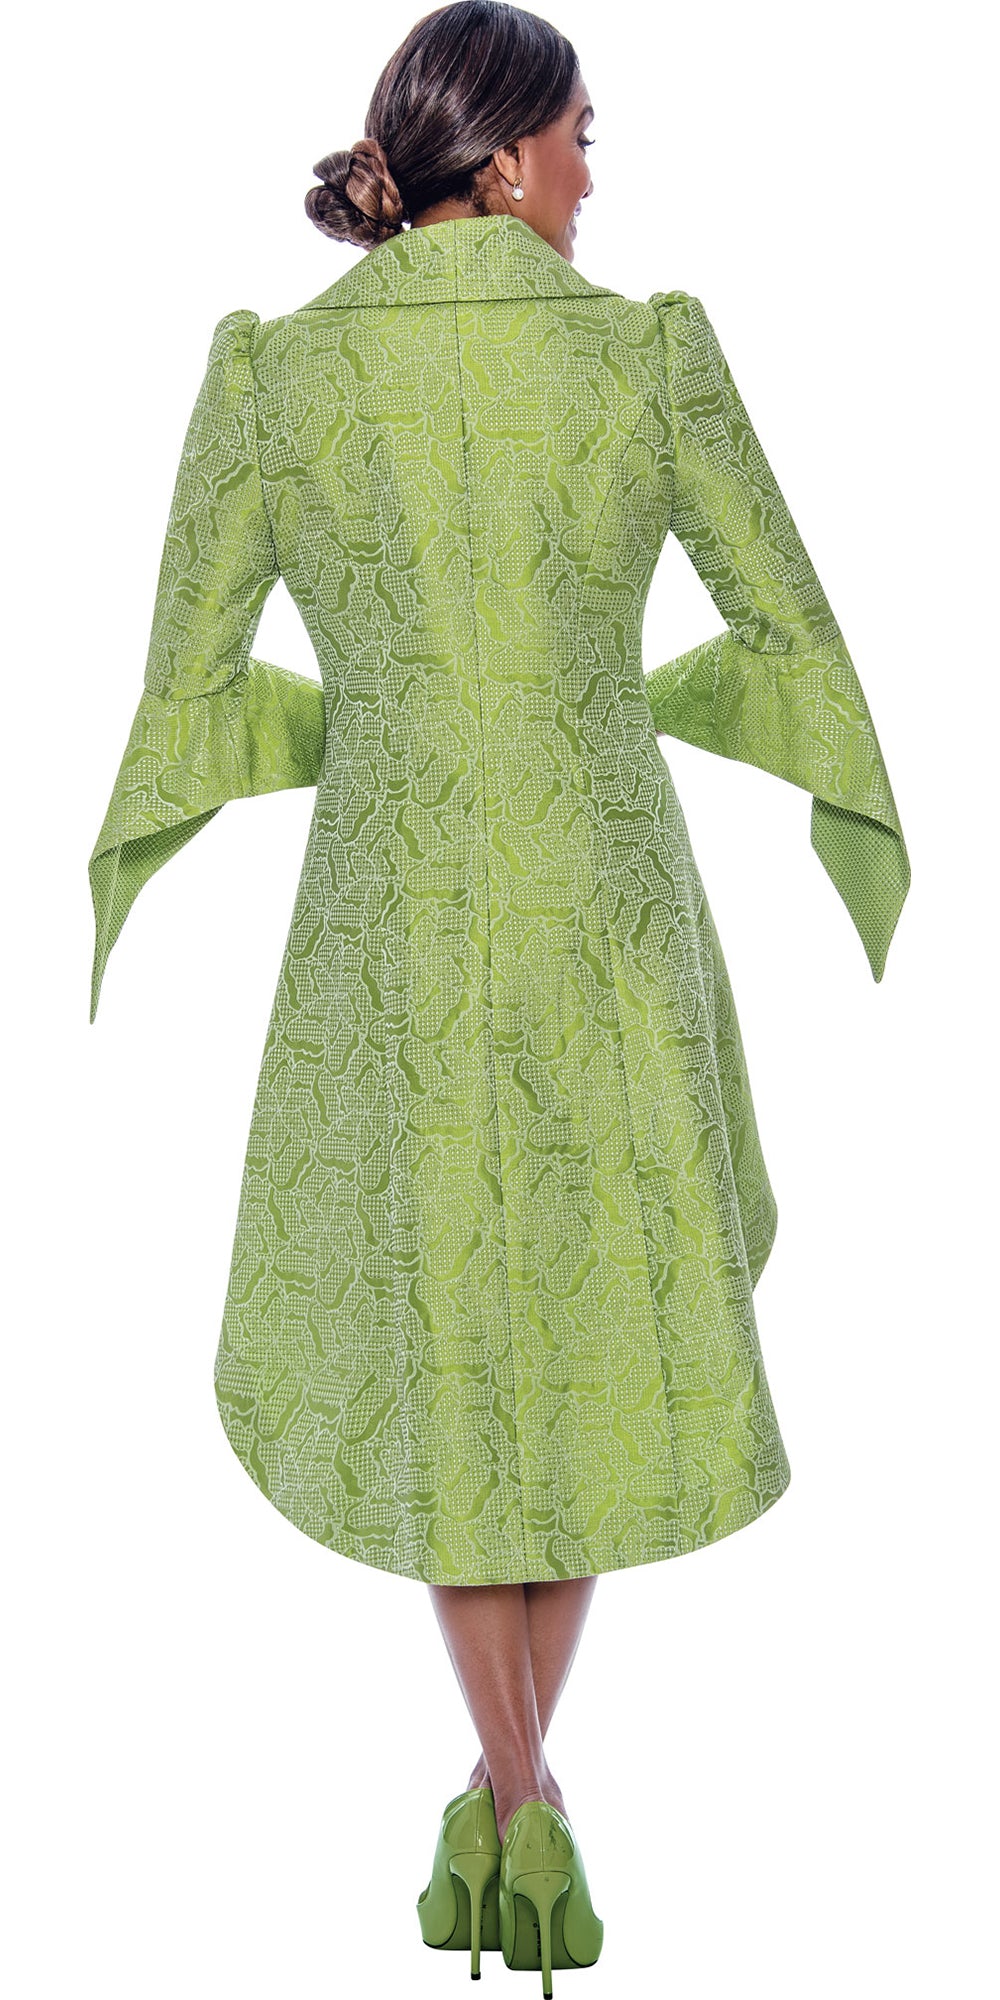 Divine Queen 2312 - Lime - 2PC Jacquard Dress and Jacket